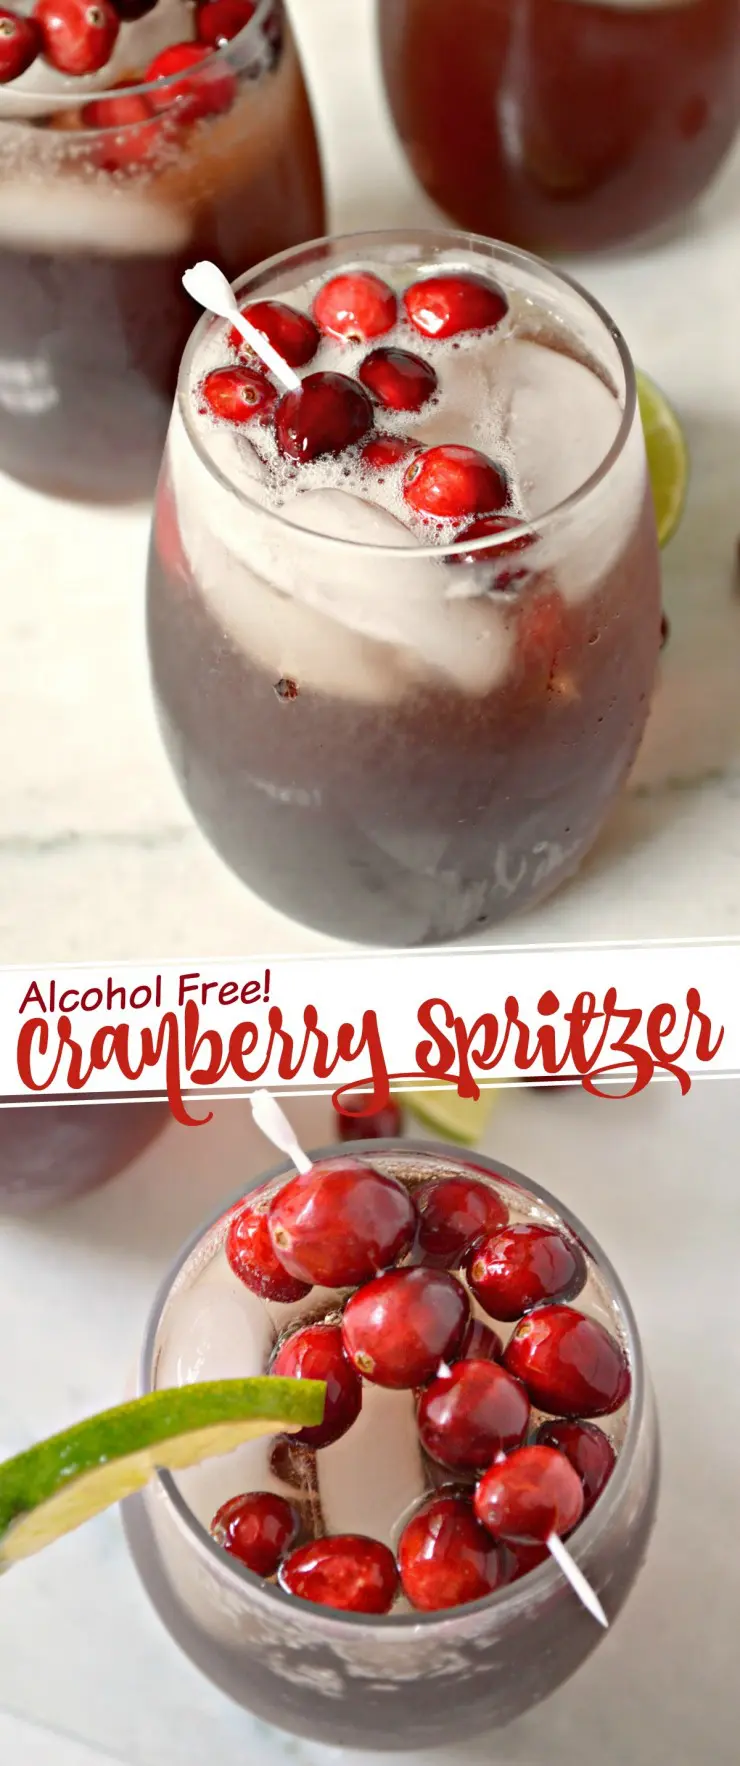 This Non-alcoholic Cranberry Spritzer is a great drink to serve over the holidays - whether at Thanksgiving Dinner, Family Christmas or even a kid friendly New Year Eve party!